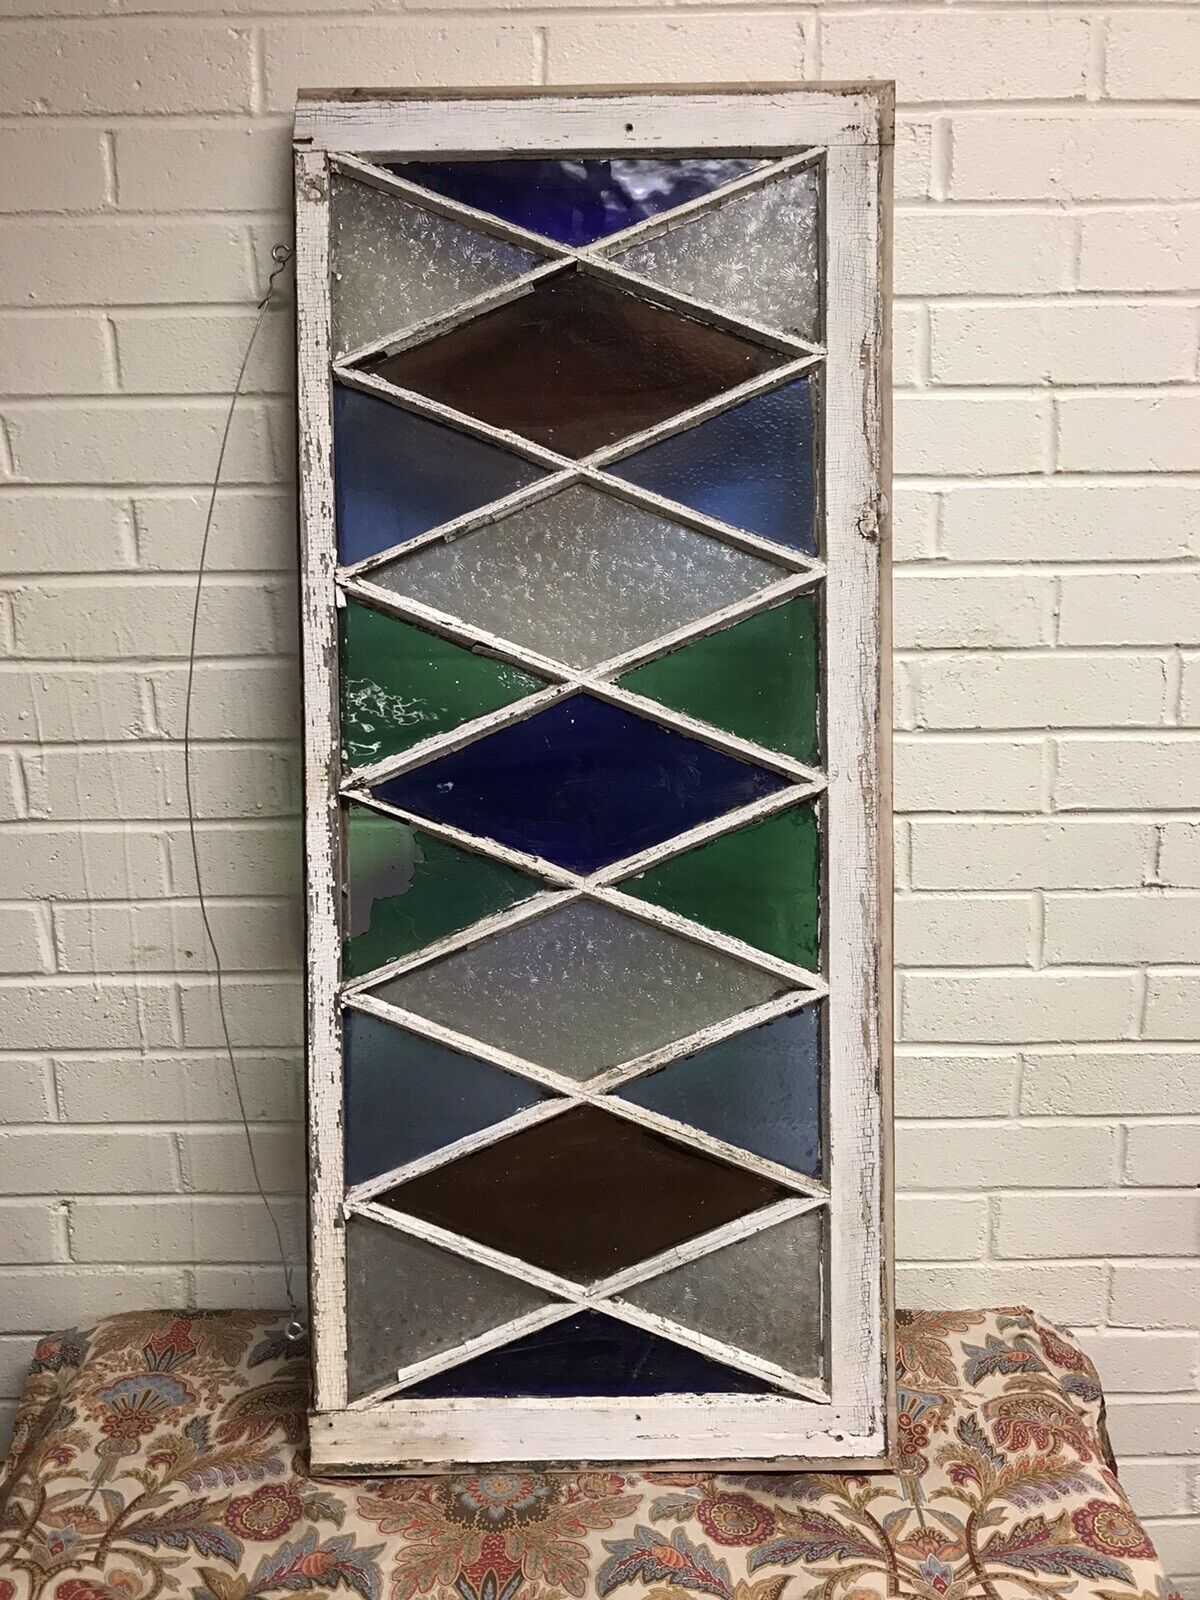 ANTIQUE VTG STAINED GLASS WINDOW WITH BROKEN PANE 39 3/4 X 17 1/4 X 1/1/2” AS IS